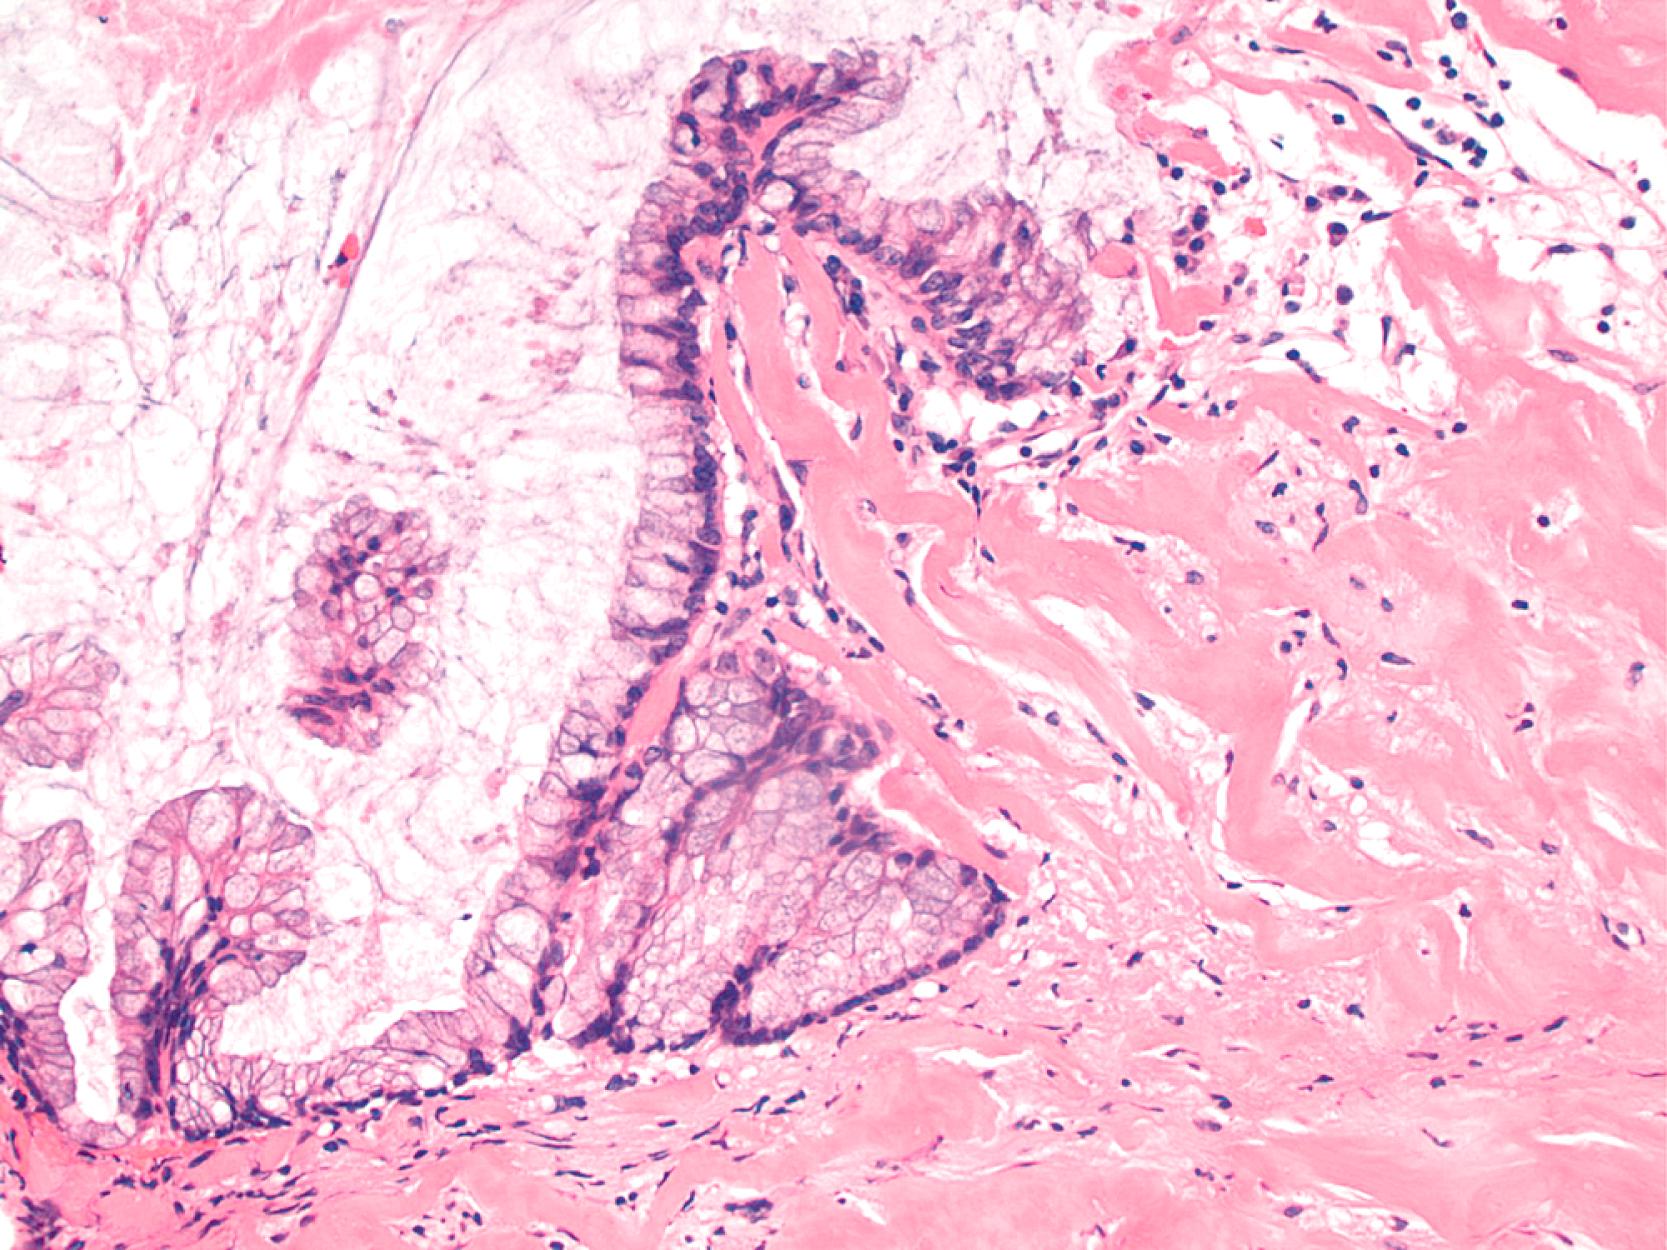 FIGURE 28.7, Low-grade appendiceal mucinous neoplasm with pushing invasion. The mucinous neoplasm is growing atop hyalinized tissue, without lamina propria or muscularis mucosae.